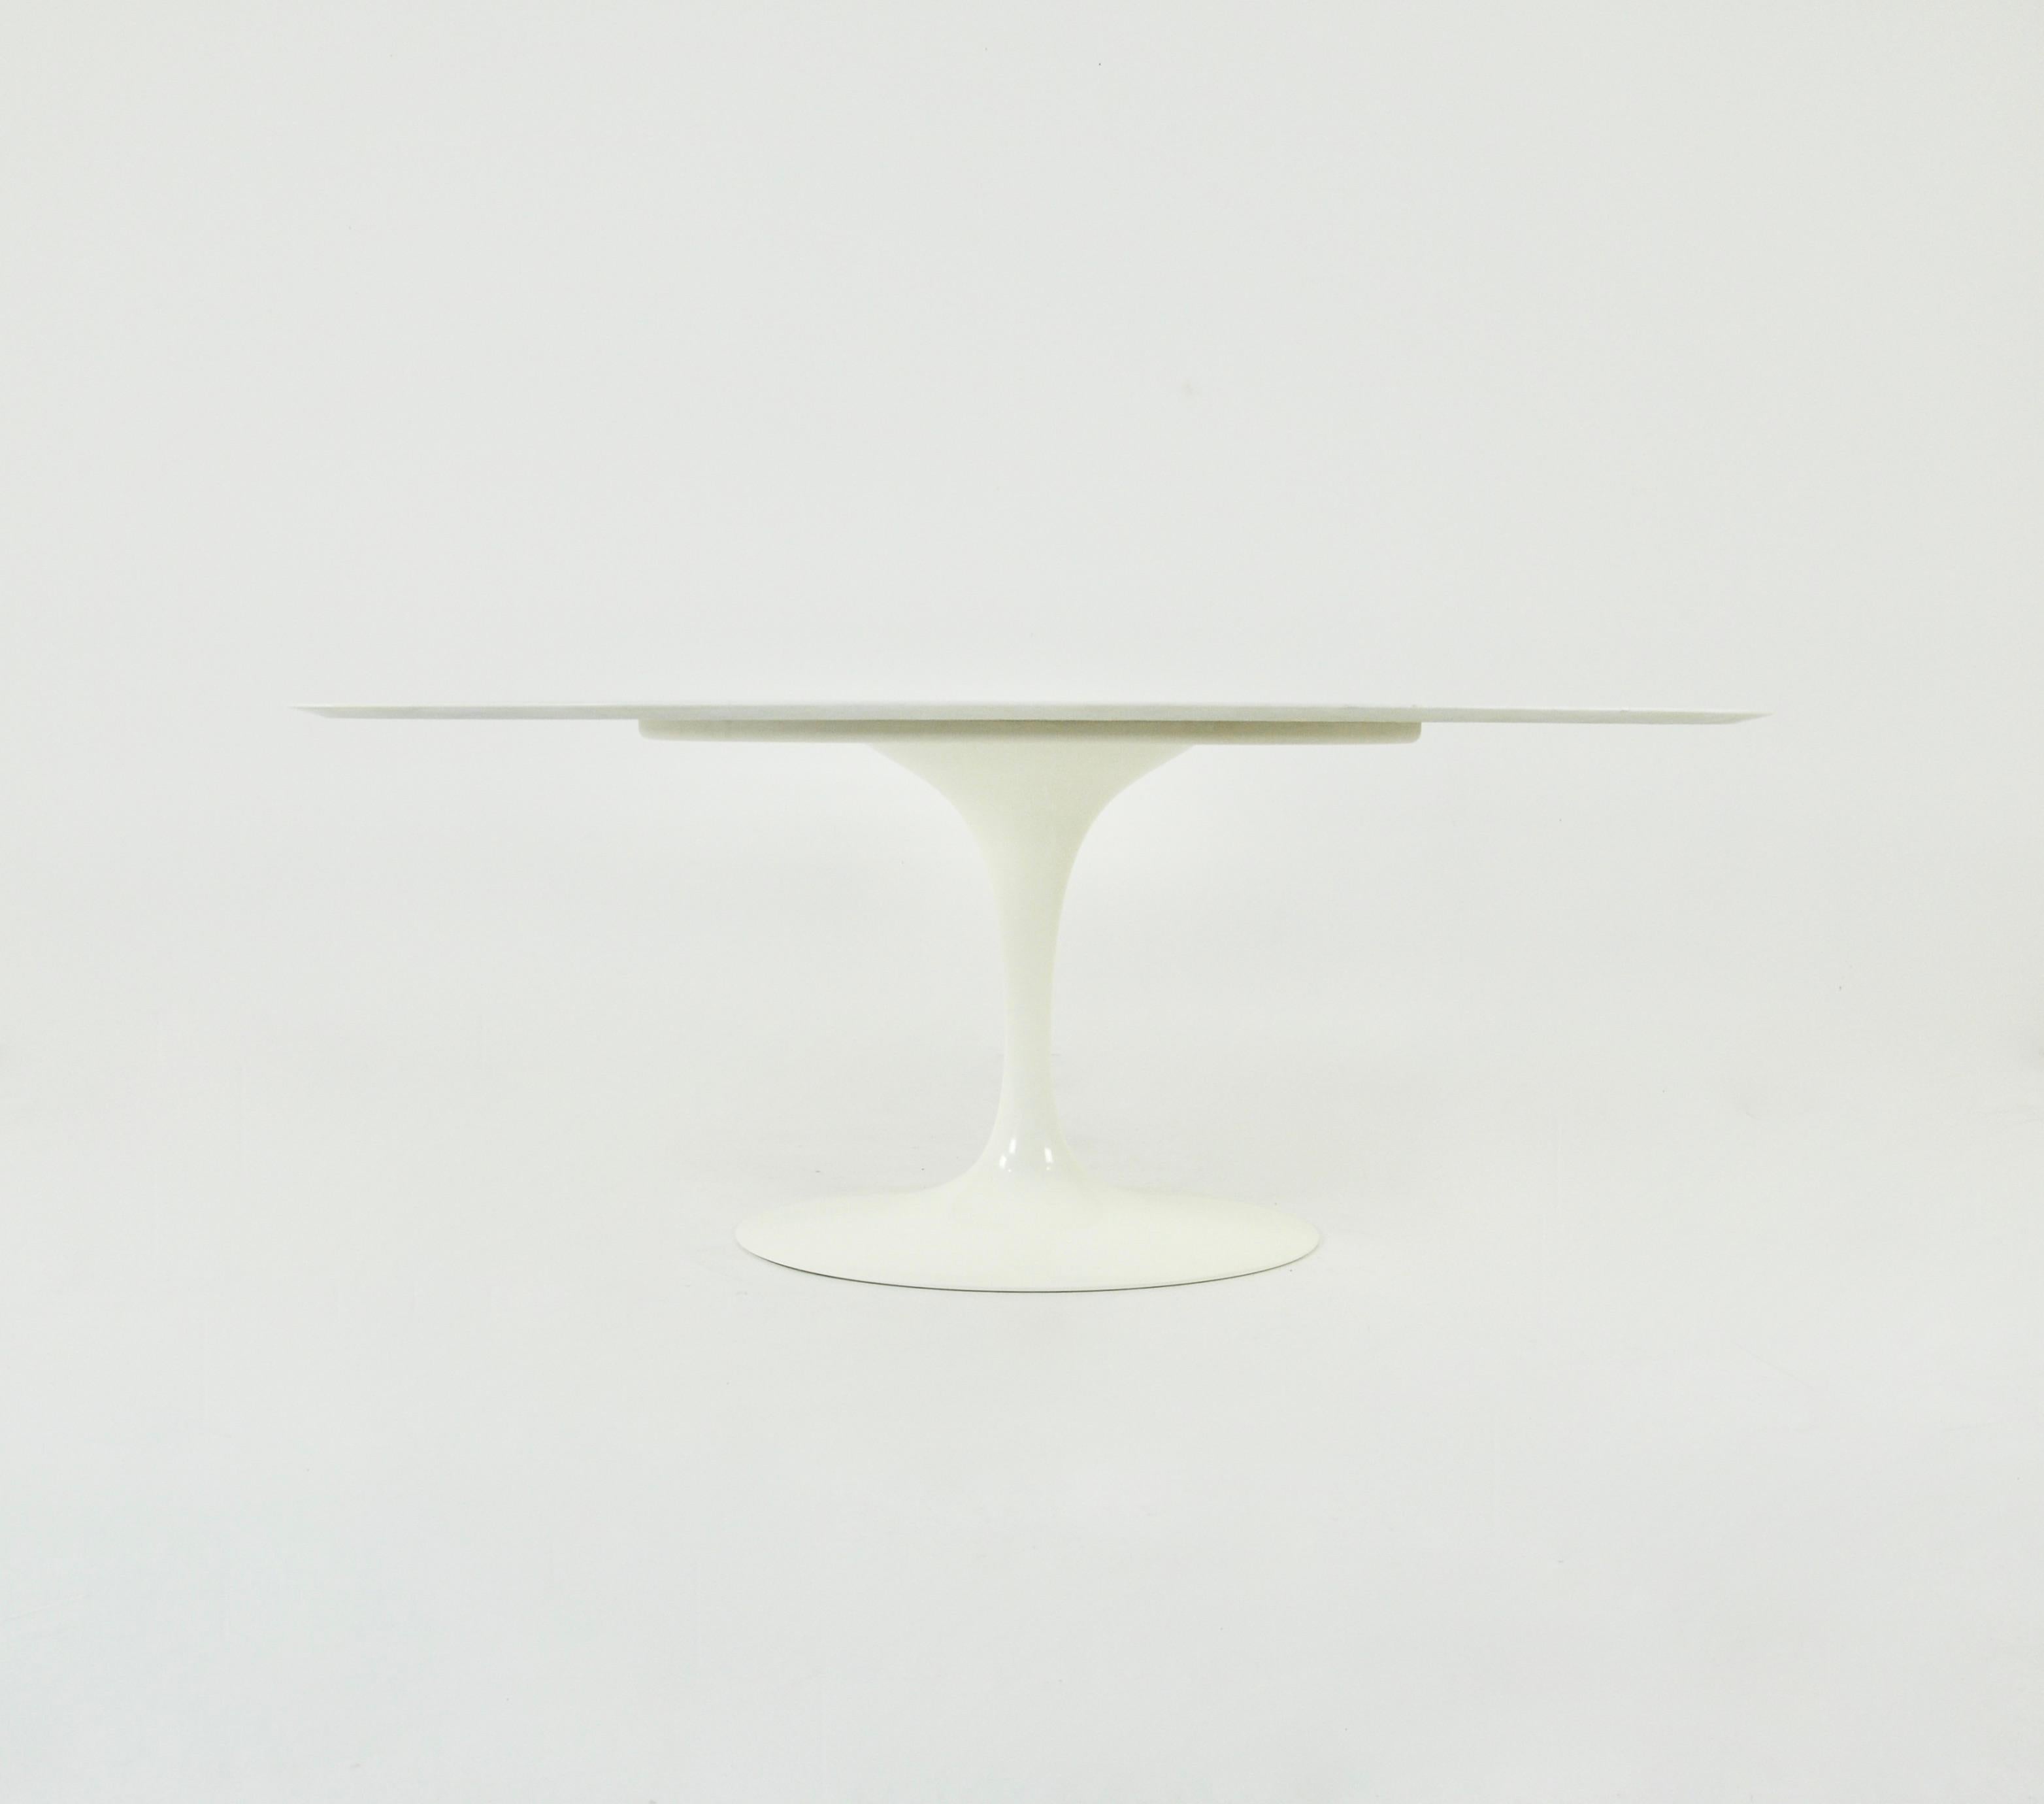 Oval table in marble with Aluminium leg designed by Eero Saarinen and produced by knoll. Estampillée Knoll sous le pied. Wear due to time and age of the table.